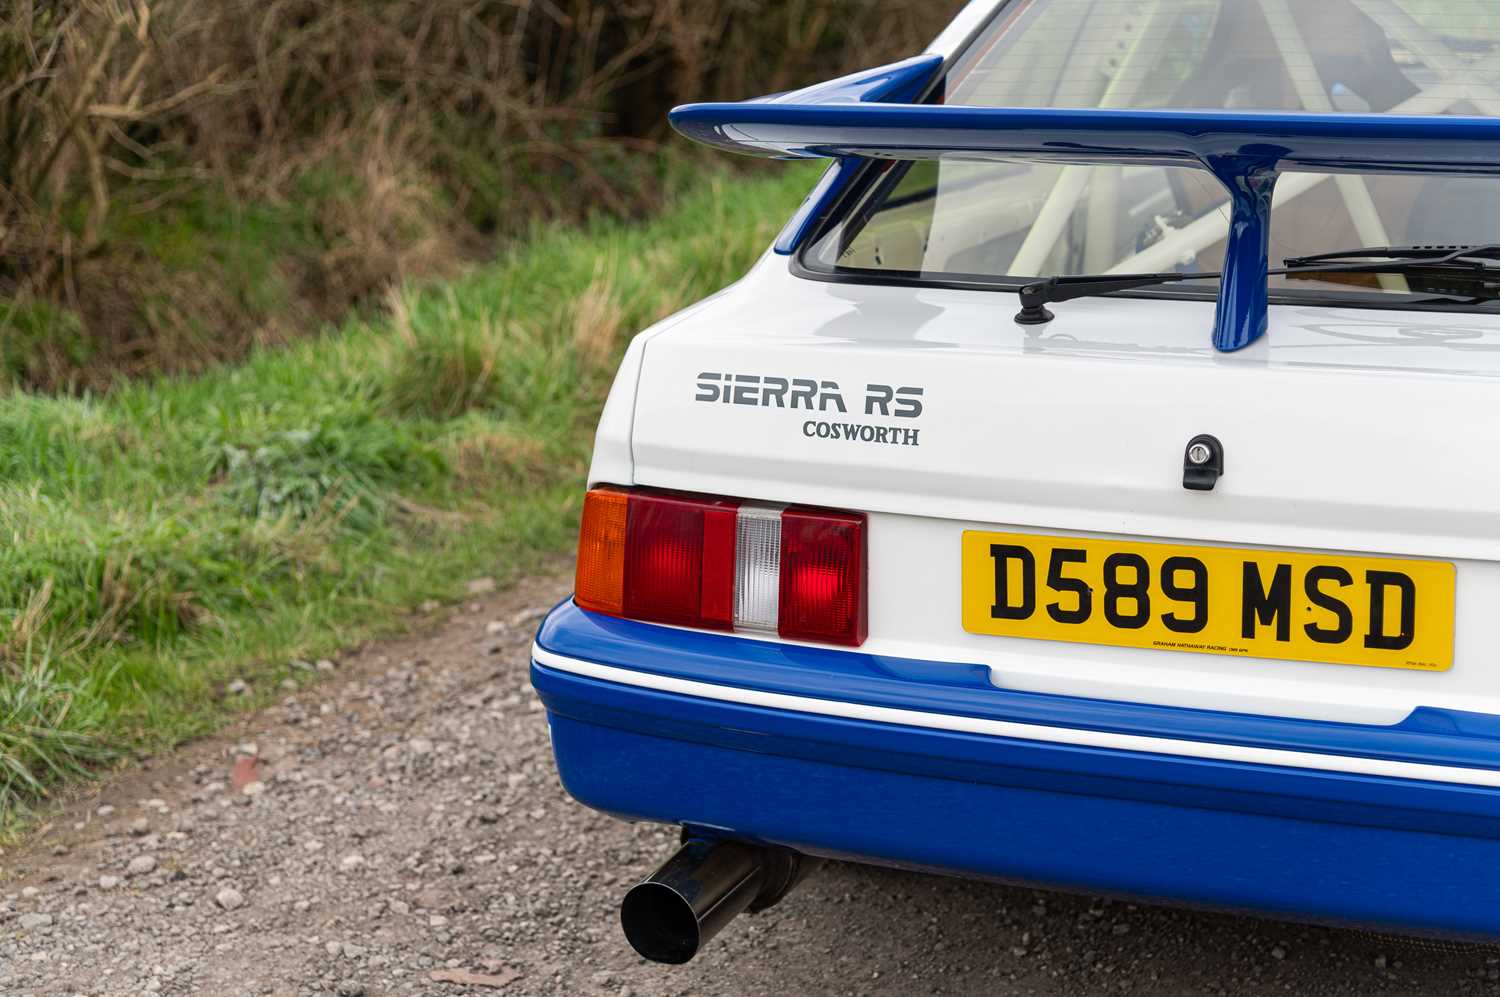 1986 Ford Sierra RS Cosworth - Image 18 of 73